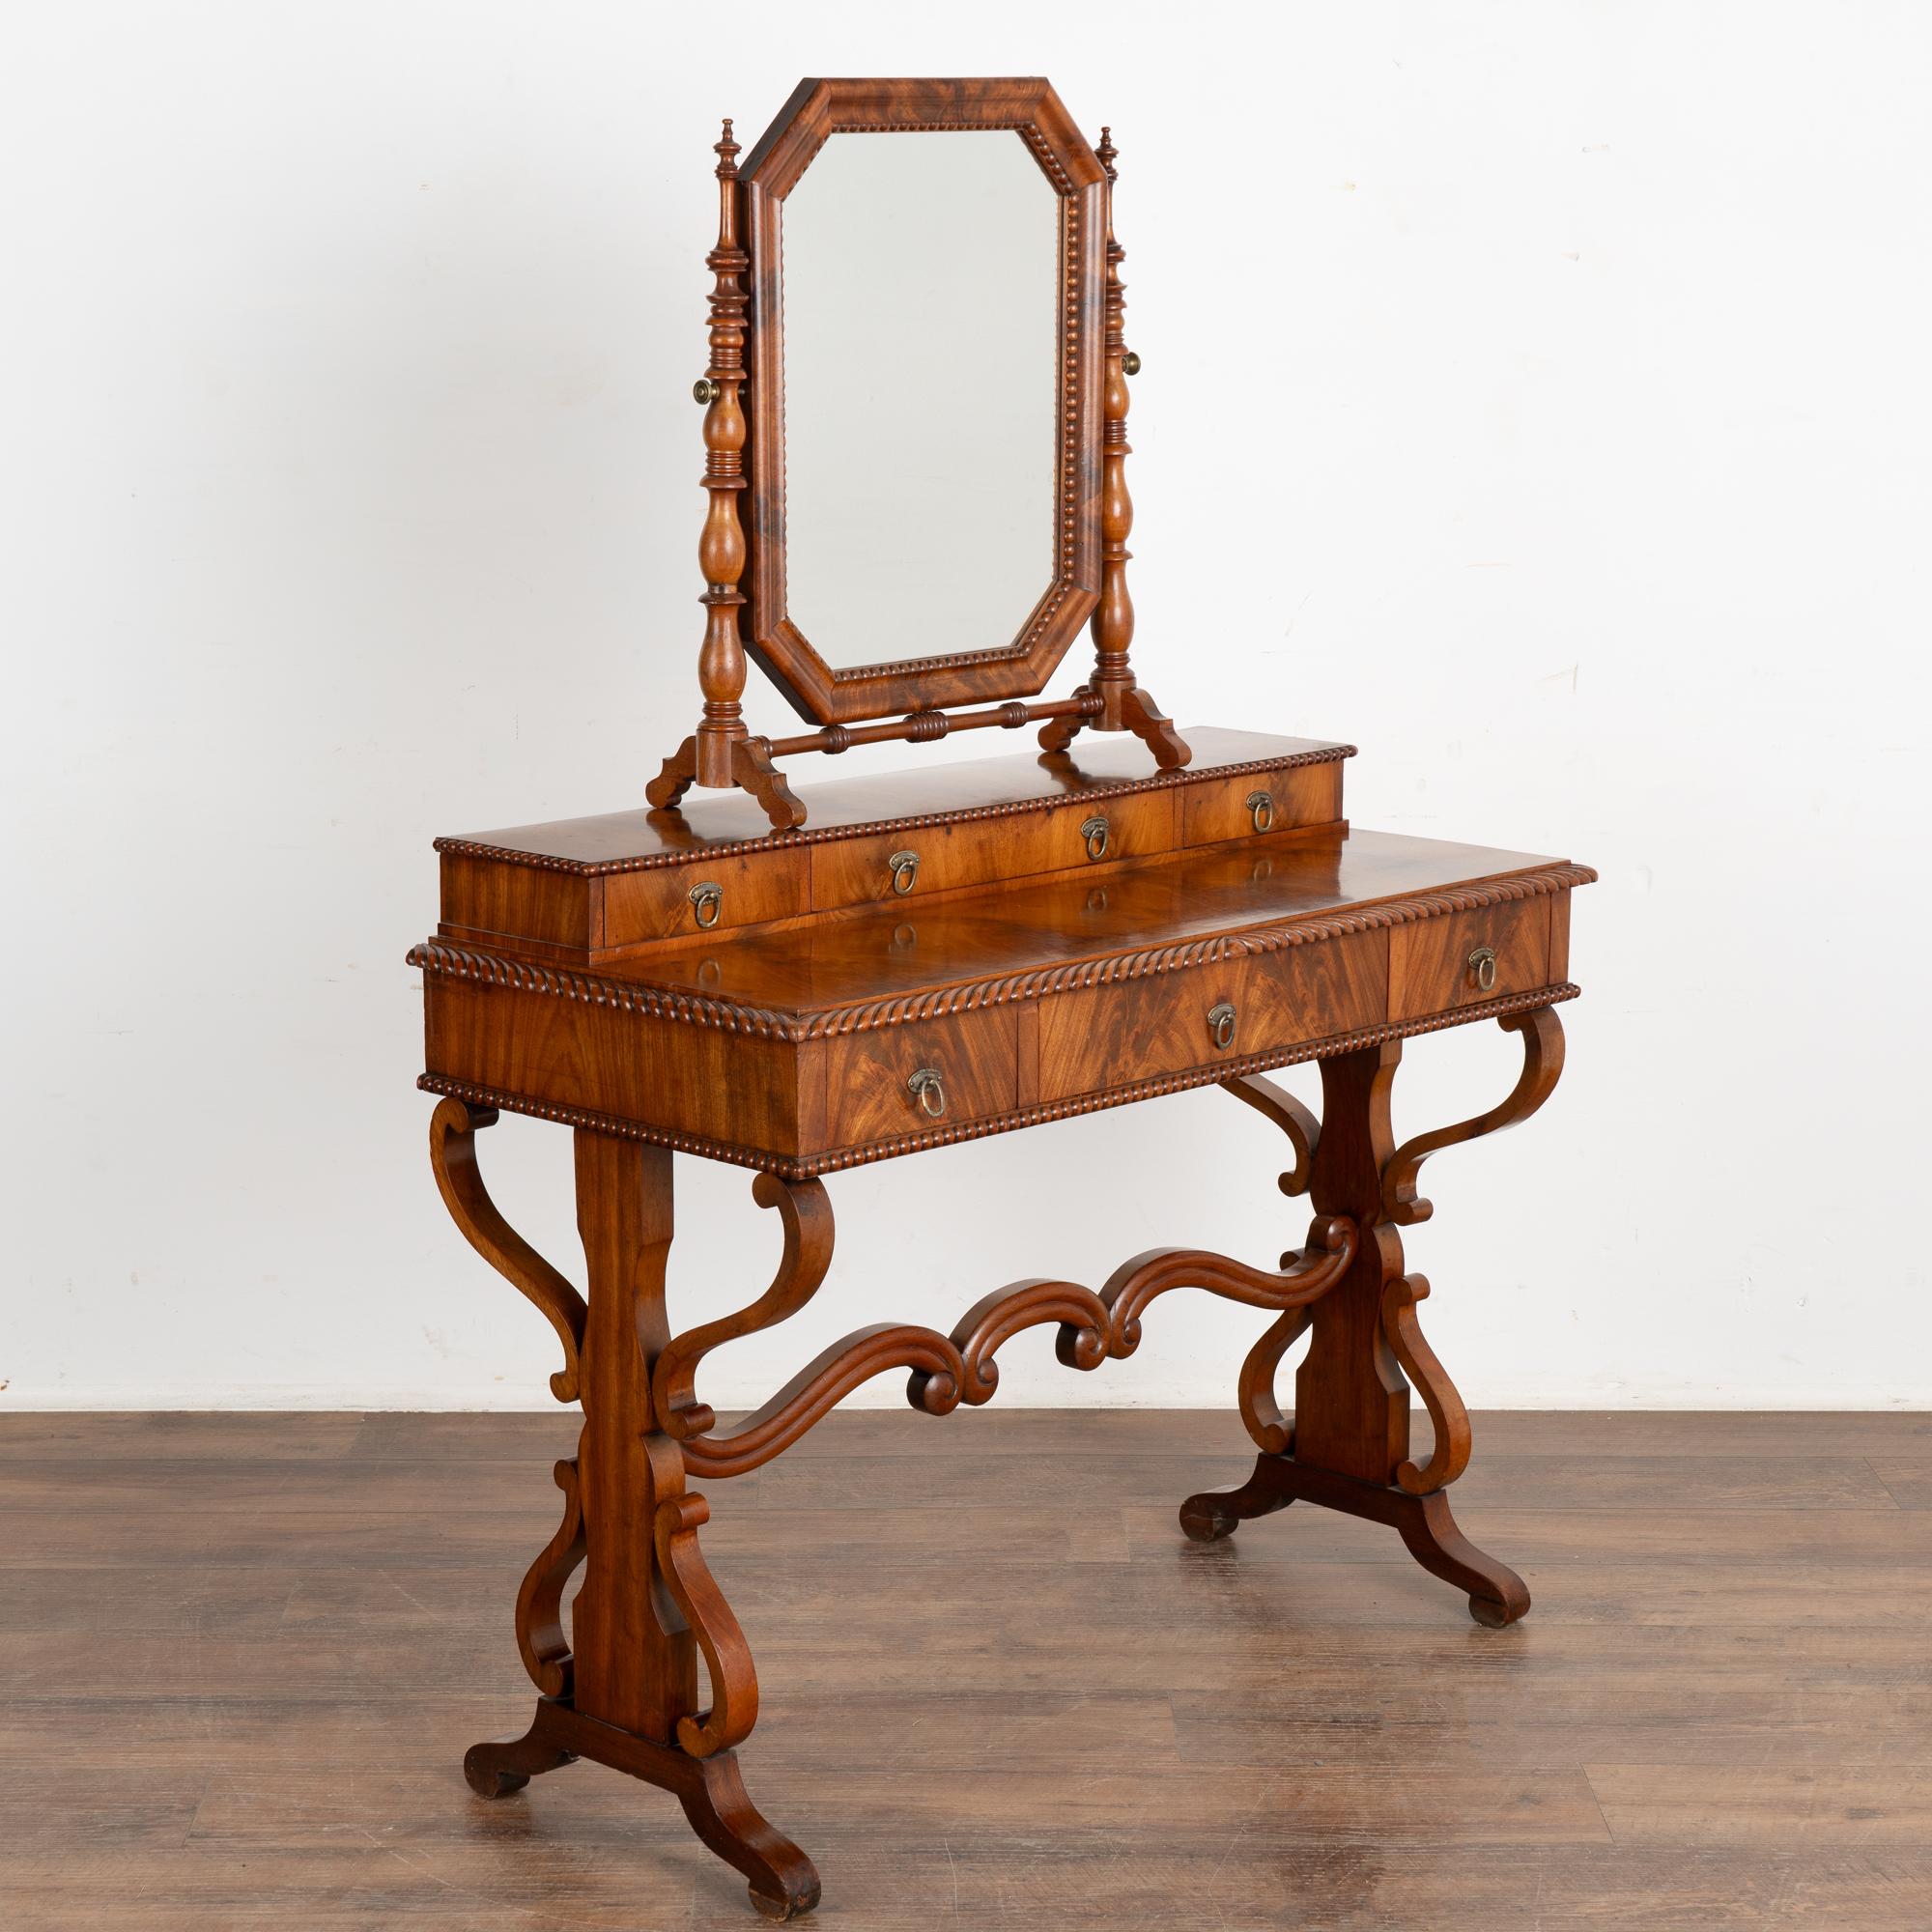 Decorative biedermeier mahogany vanity or dressing table with mirror.
Six drawers, adjustable mirror (which can be removed from table top, see photos), and decorative carved legs and base.
Restored, stable and ready for use. 
Any scratches, cracks,